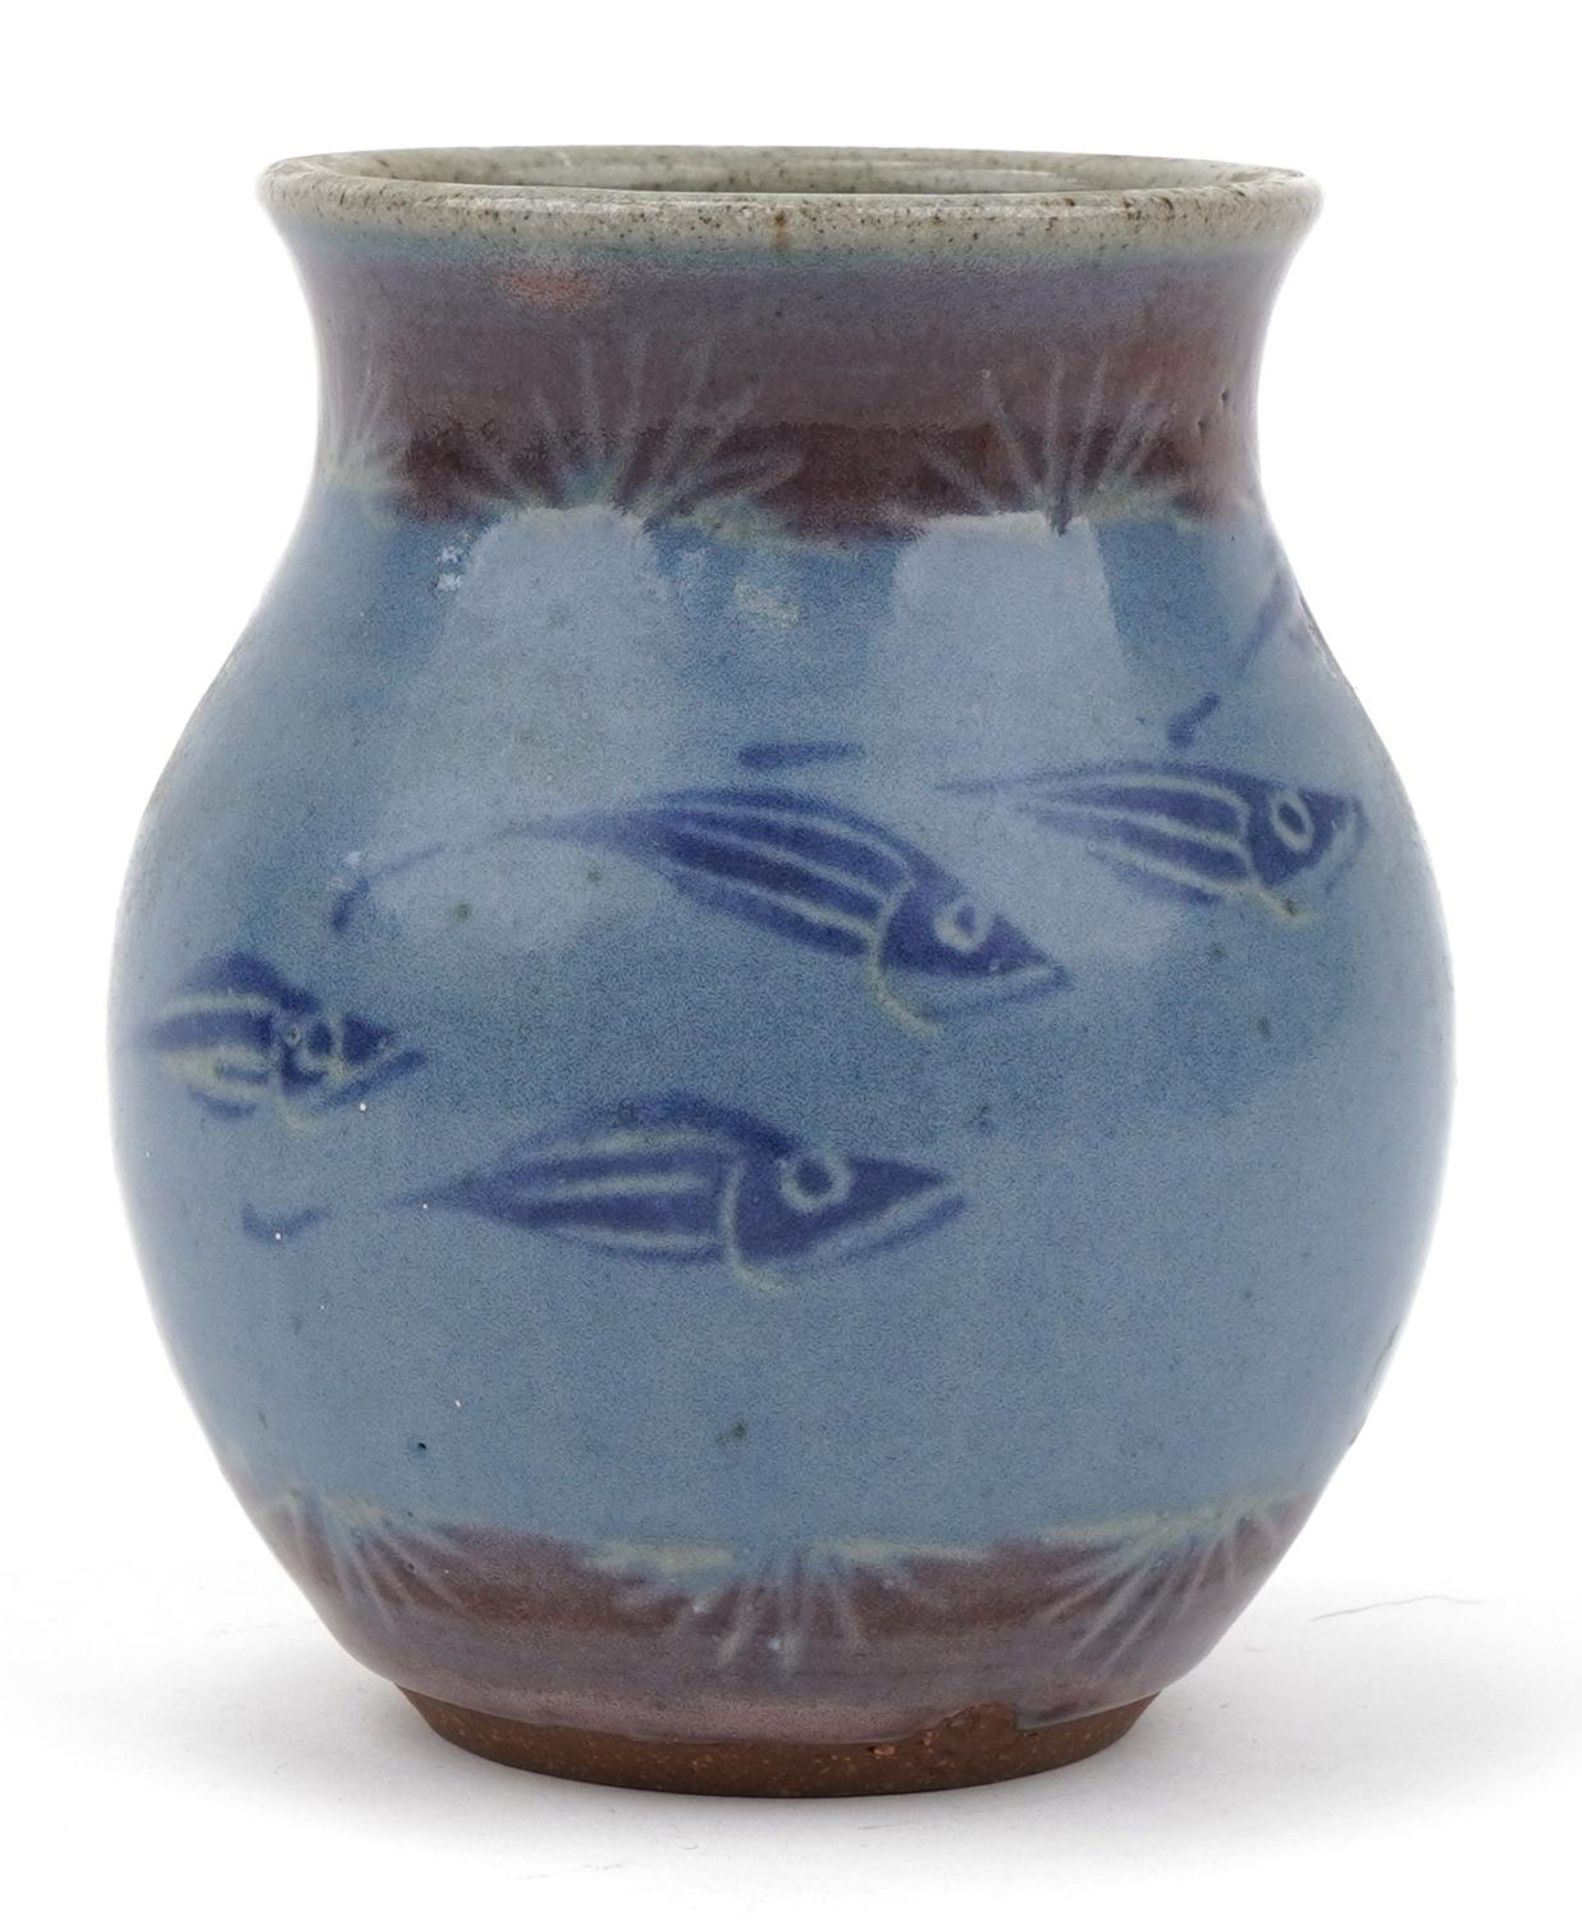 St Ives studio pottery vase hand painted with stylised fish, 12cm high